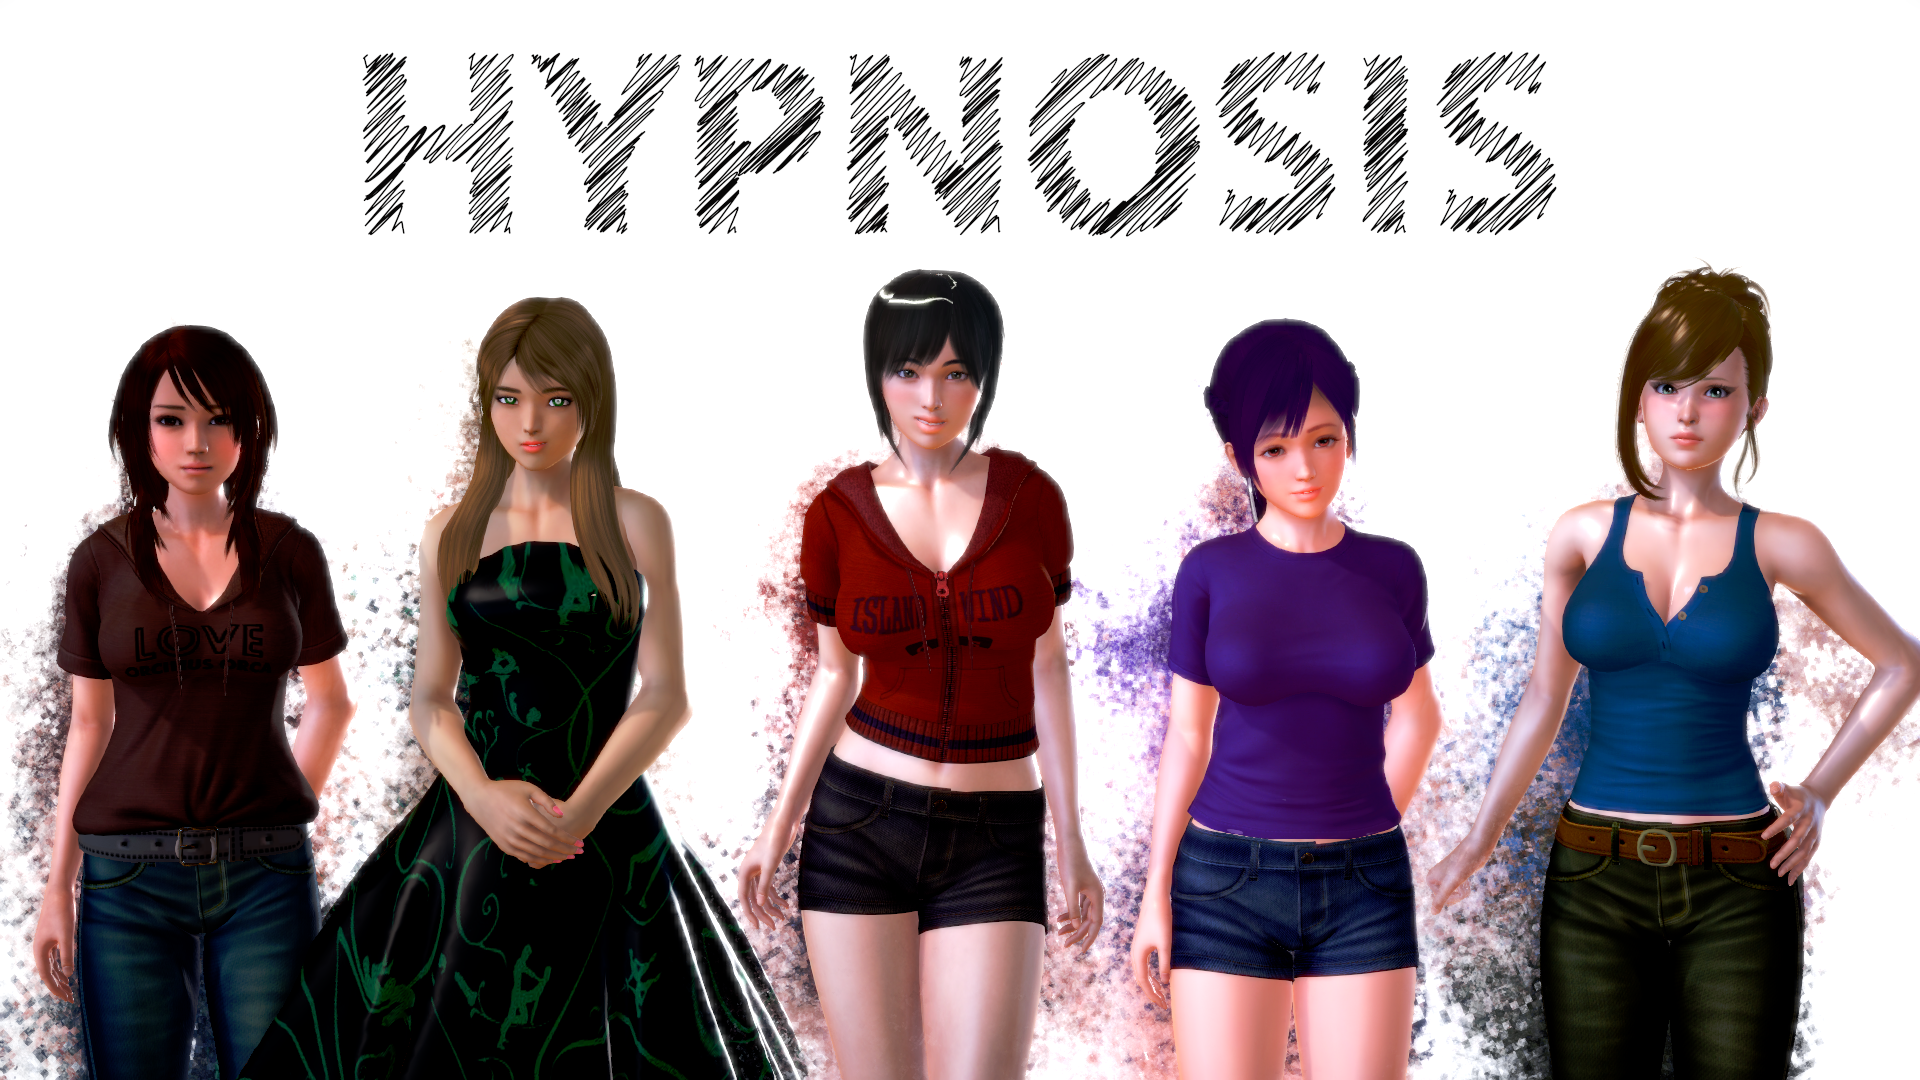 Vive Hypnosis Nudetits Org